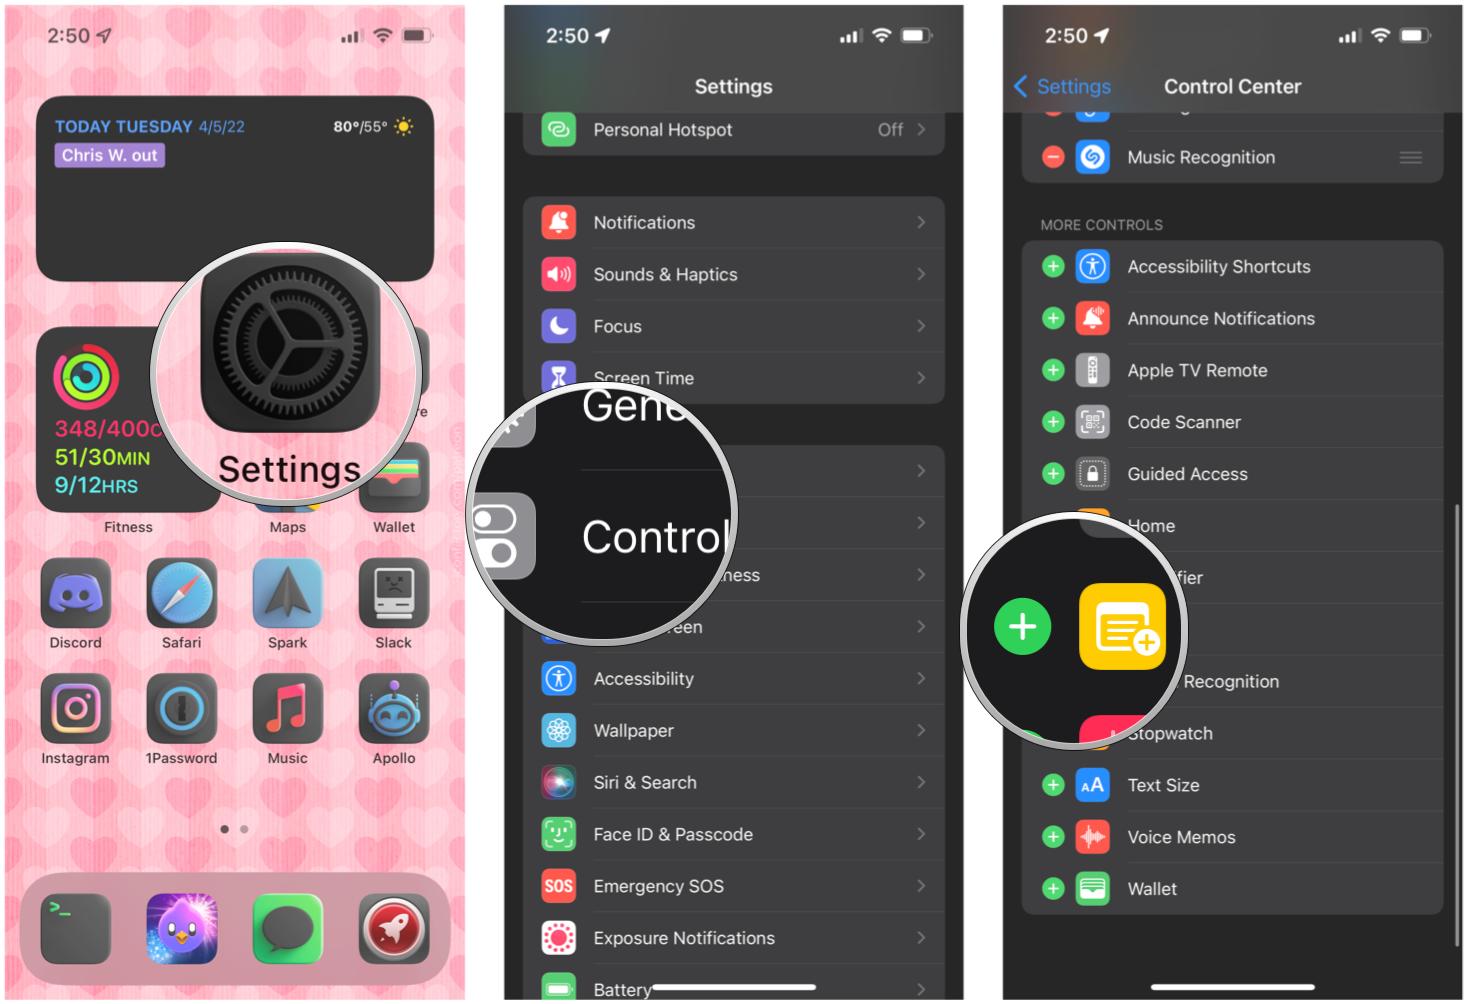 Enable Notes in Control Center on iPhone: Launch Settings, tap Control Center, tap green plus next to Notes icon